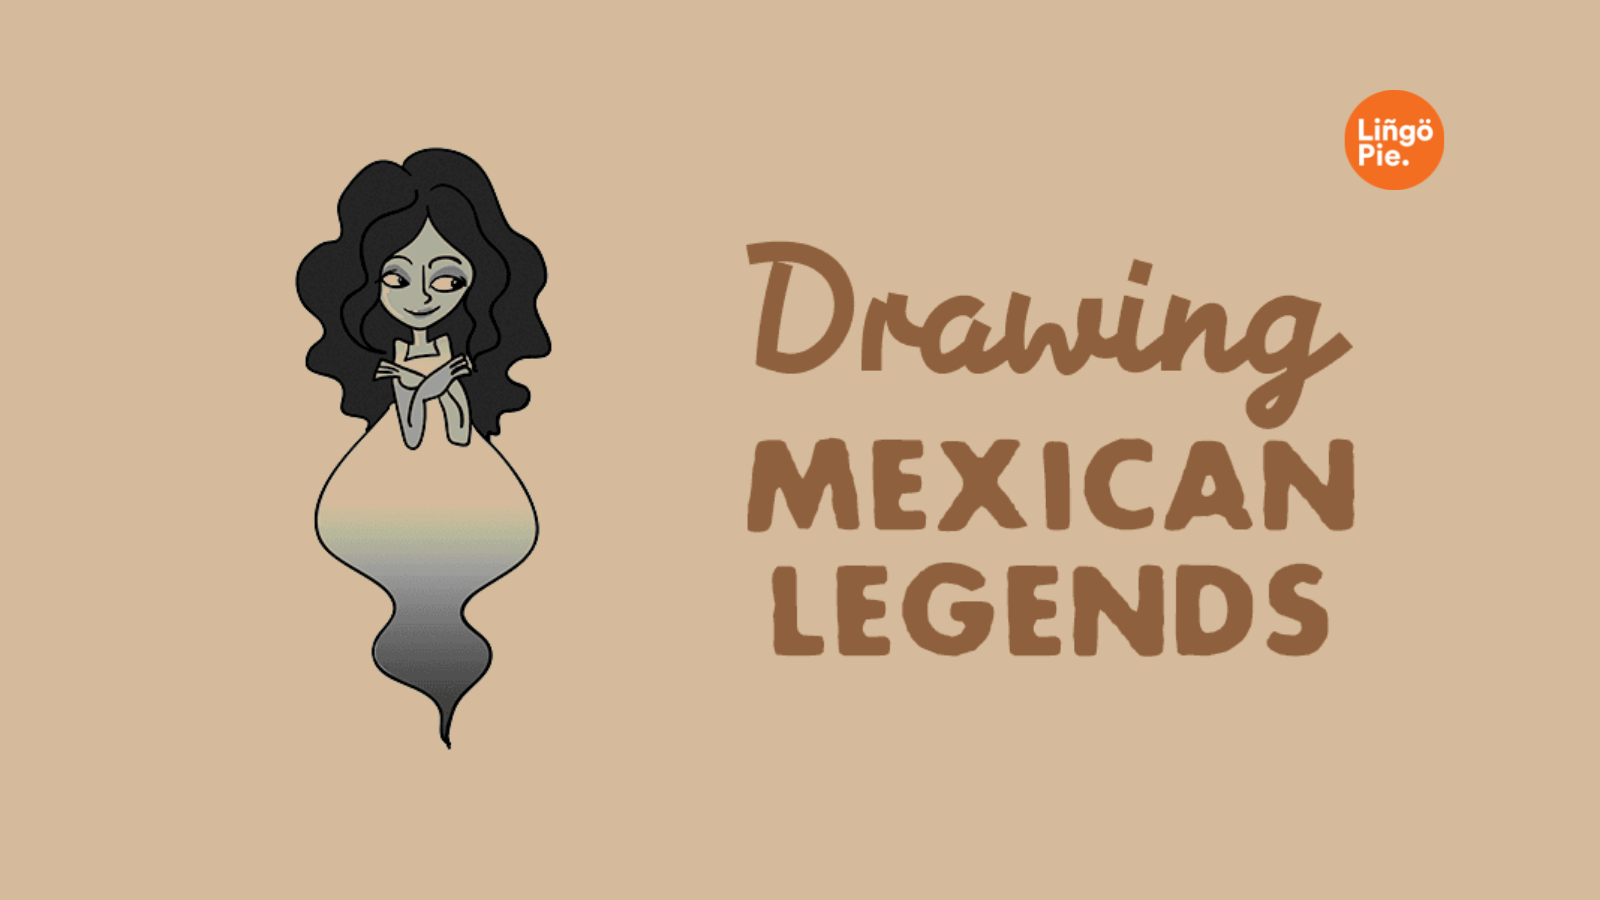 Drawing Mexican Legends on Lingopie